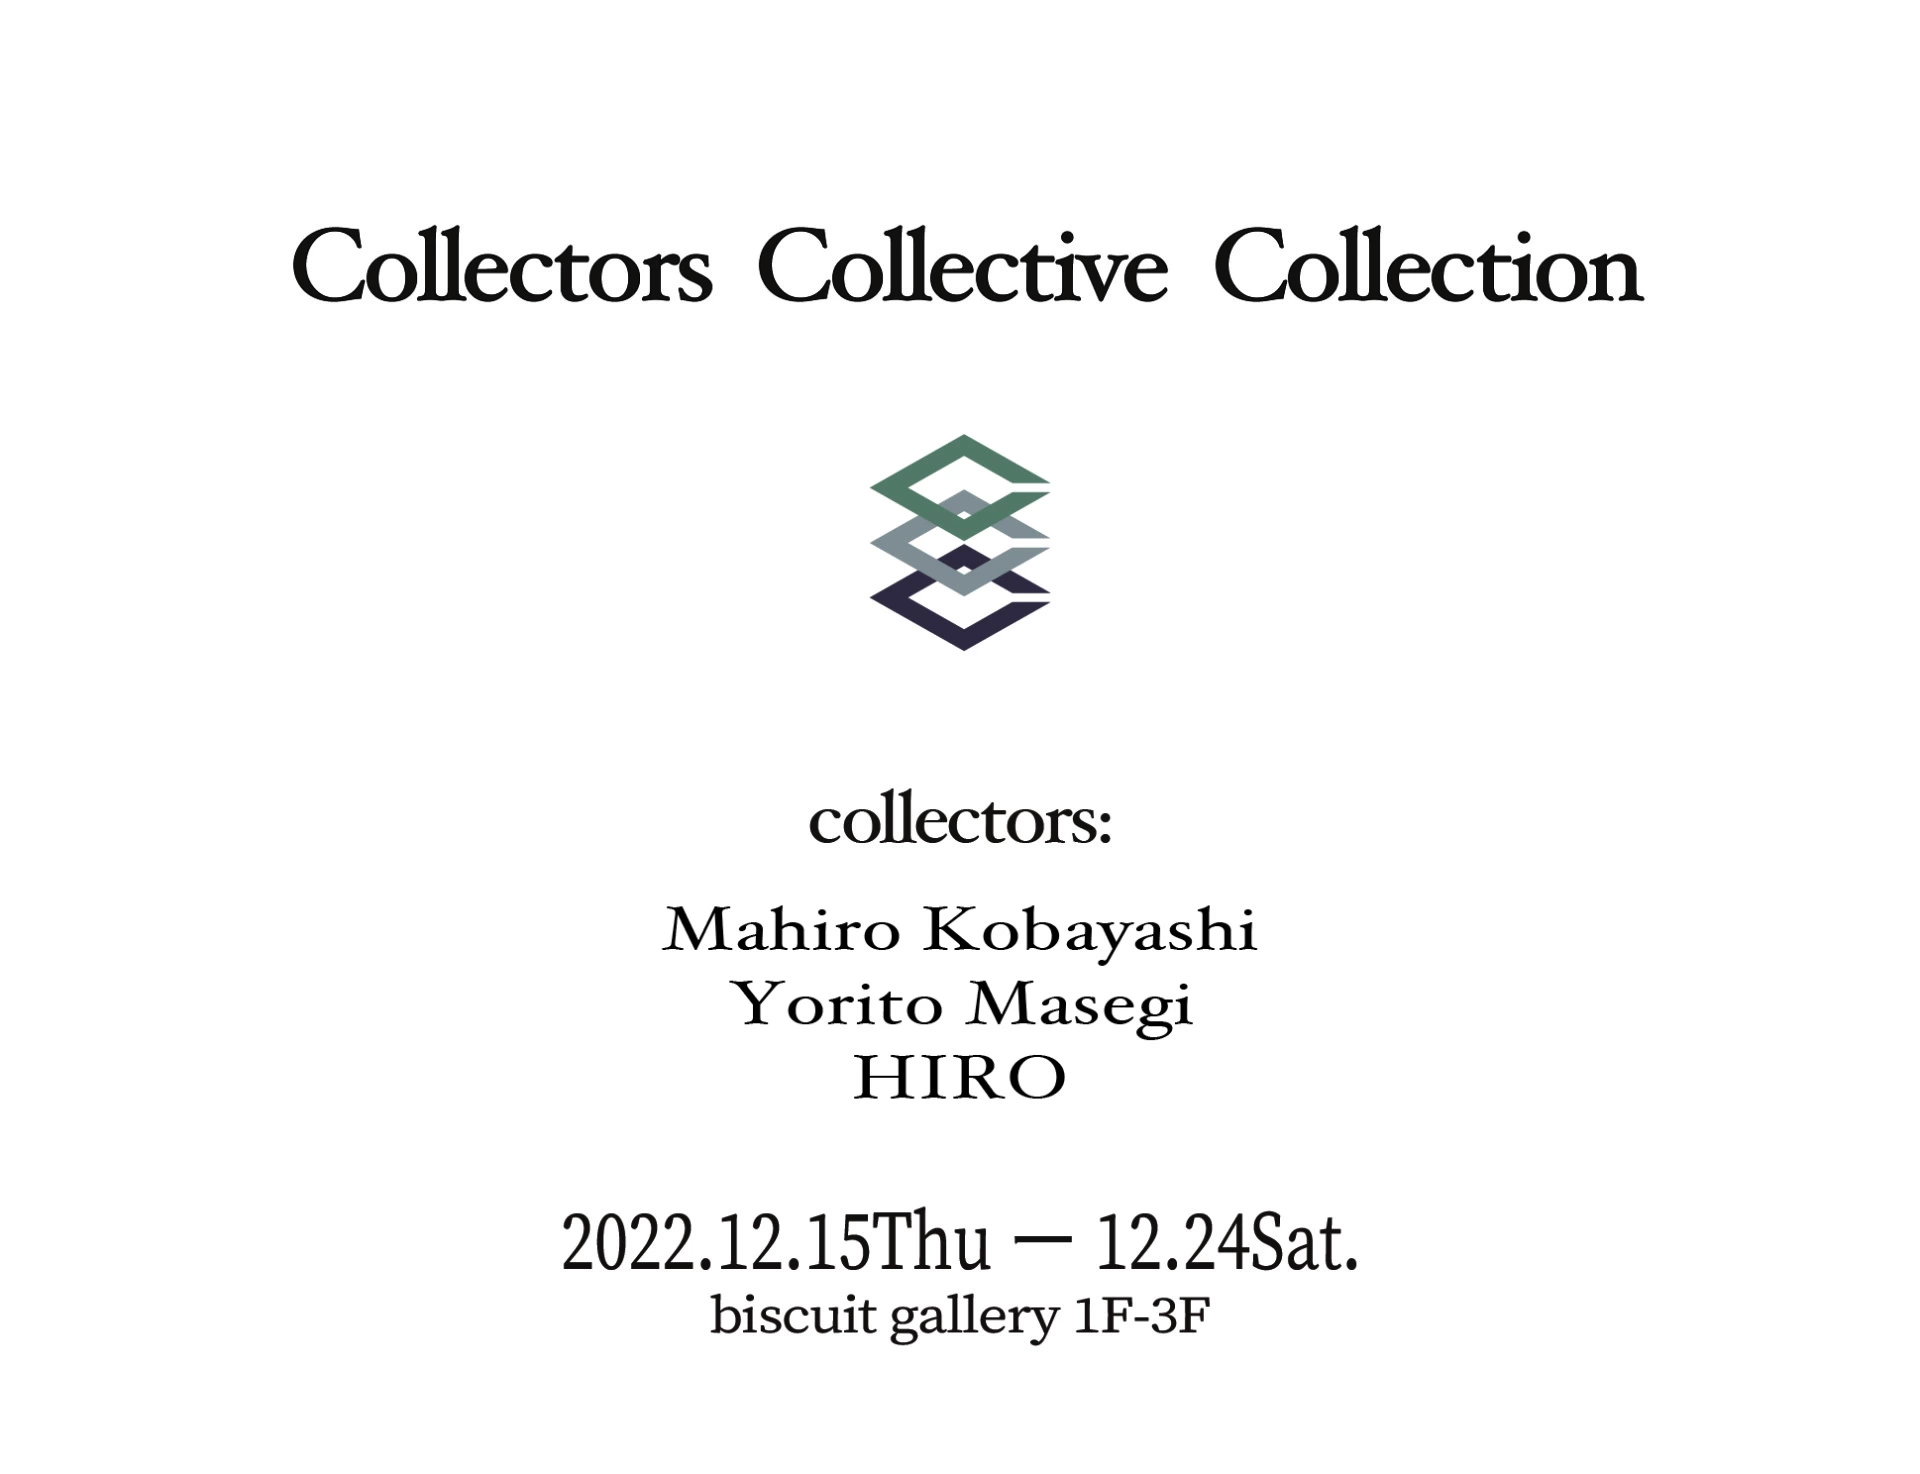 Collectors Collective Collection